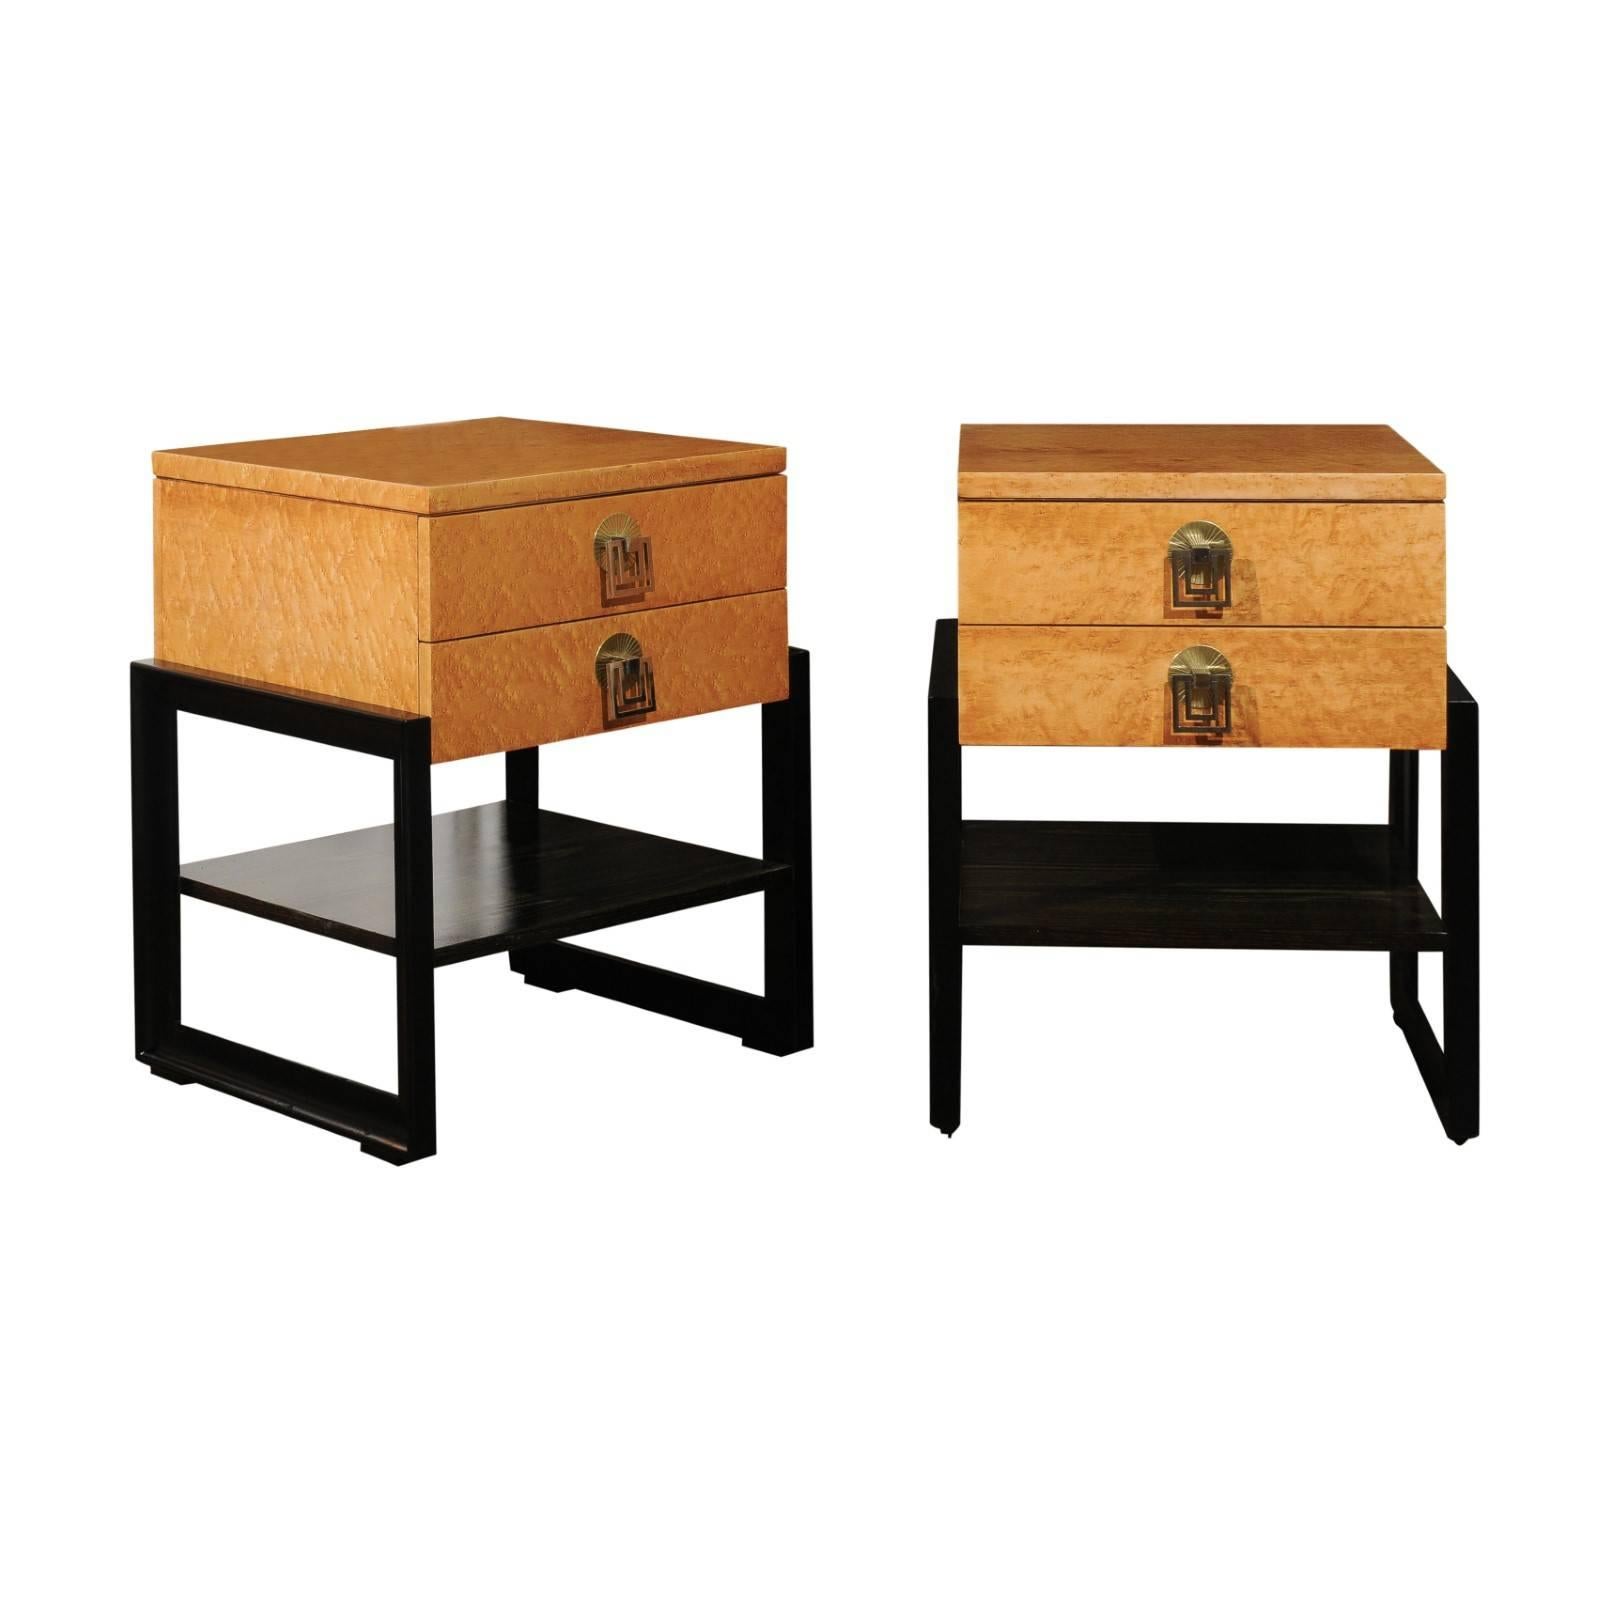 Magnificent Pair of End Tables by Renzo Rutili in Birdseye Maple, circa 1955